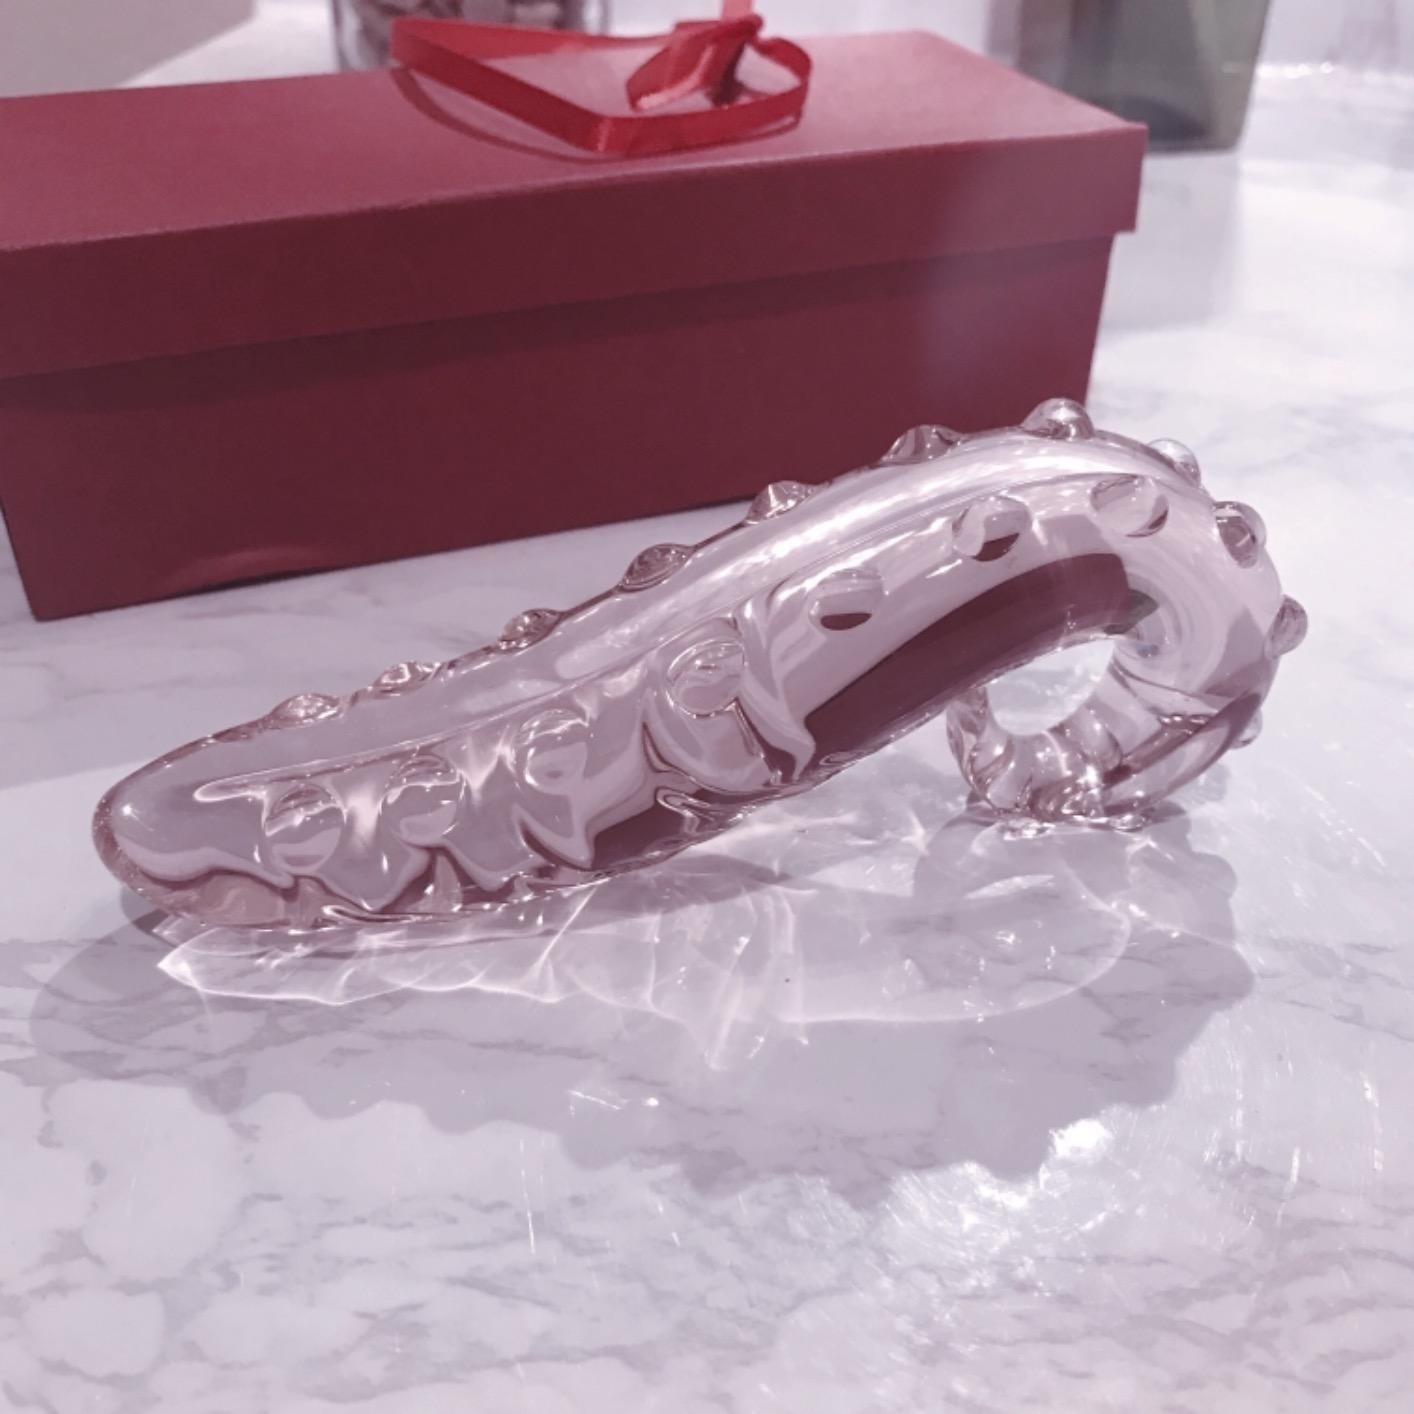 Pink detailed tentacle glass dildo next to box